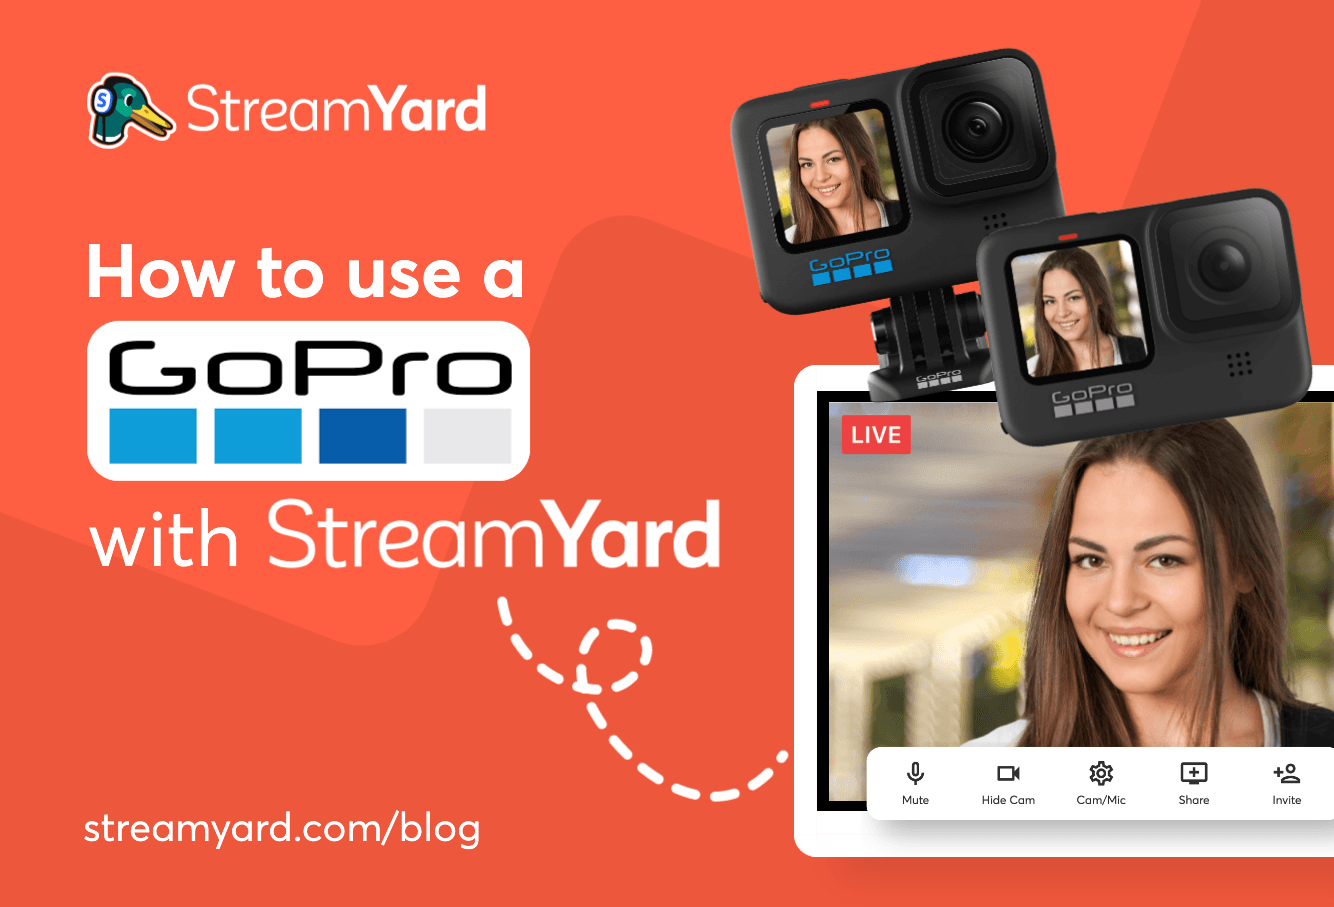 Learn how to use a GoPro as a webcam with StreamYard and get double duty from your GoPro camera by creating stunning live broadcasts.